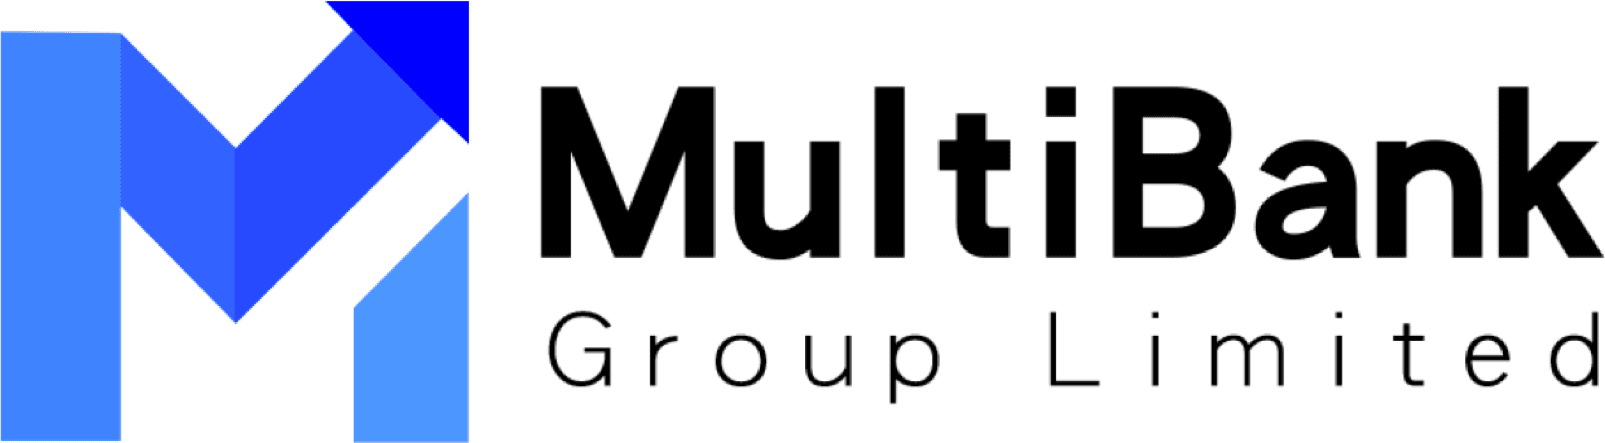 MultiBank Group Limited